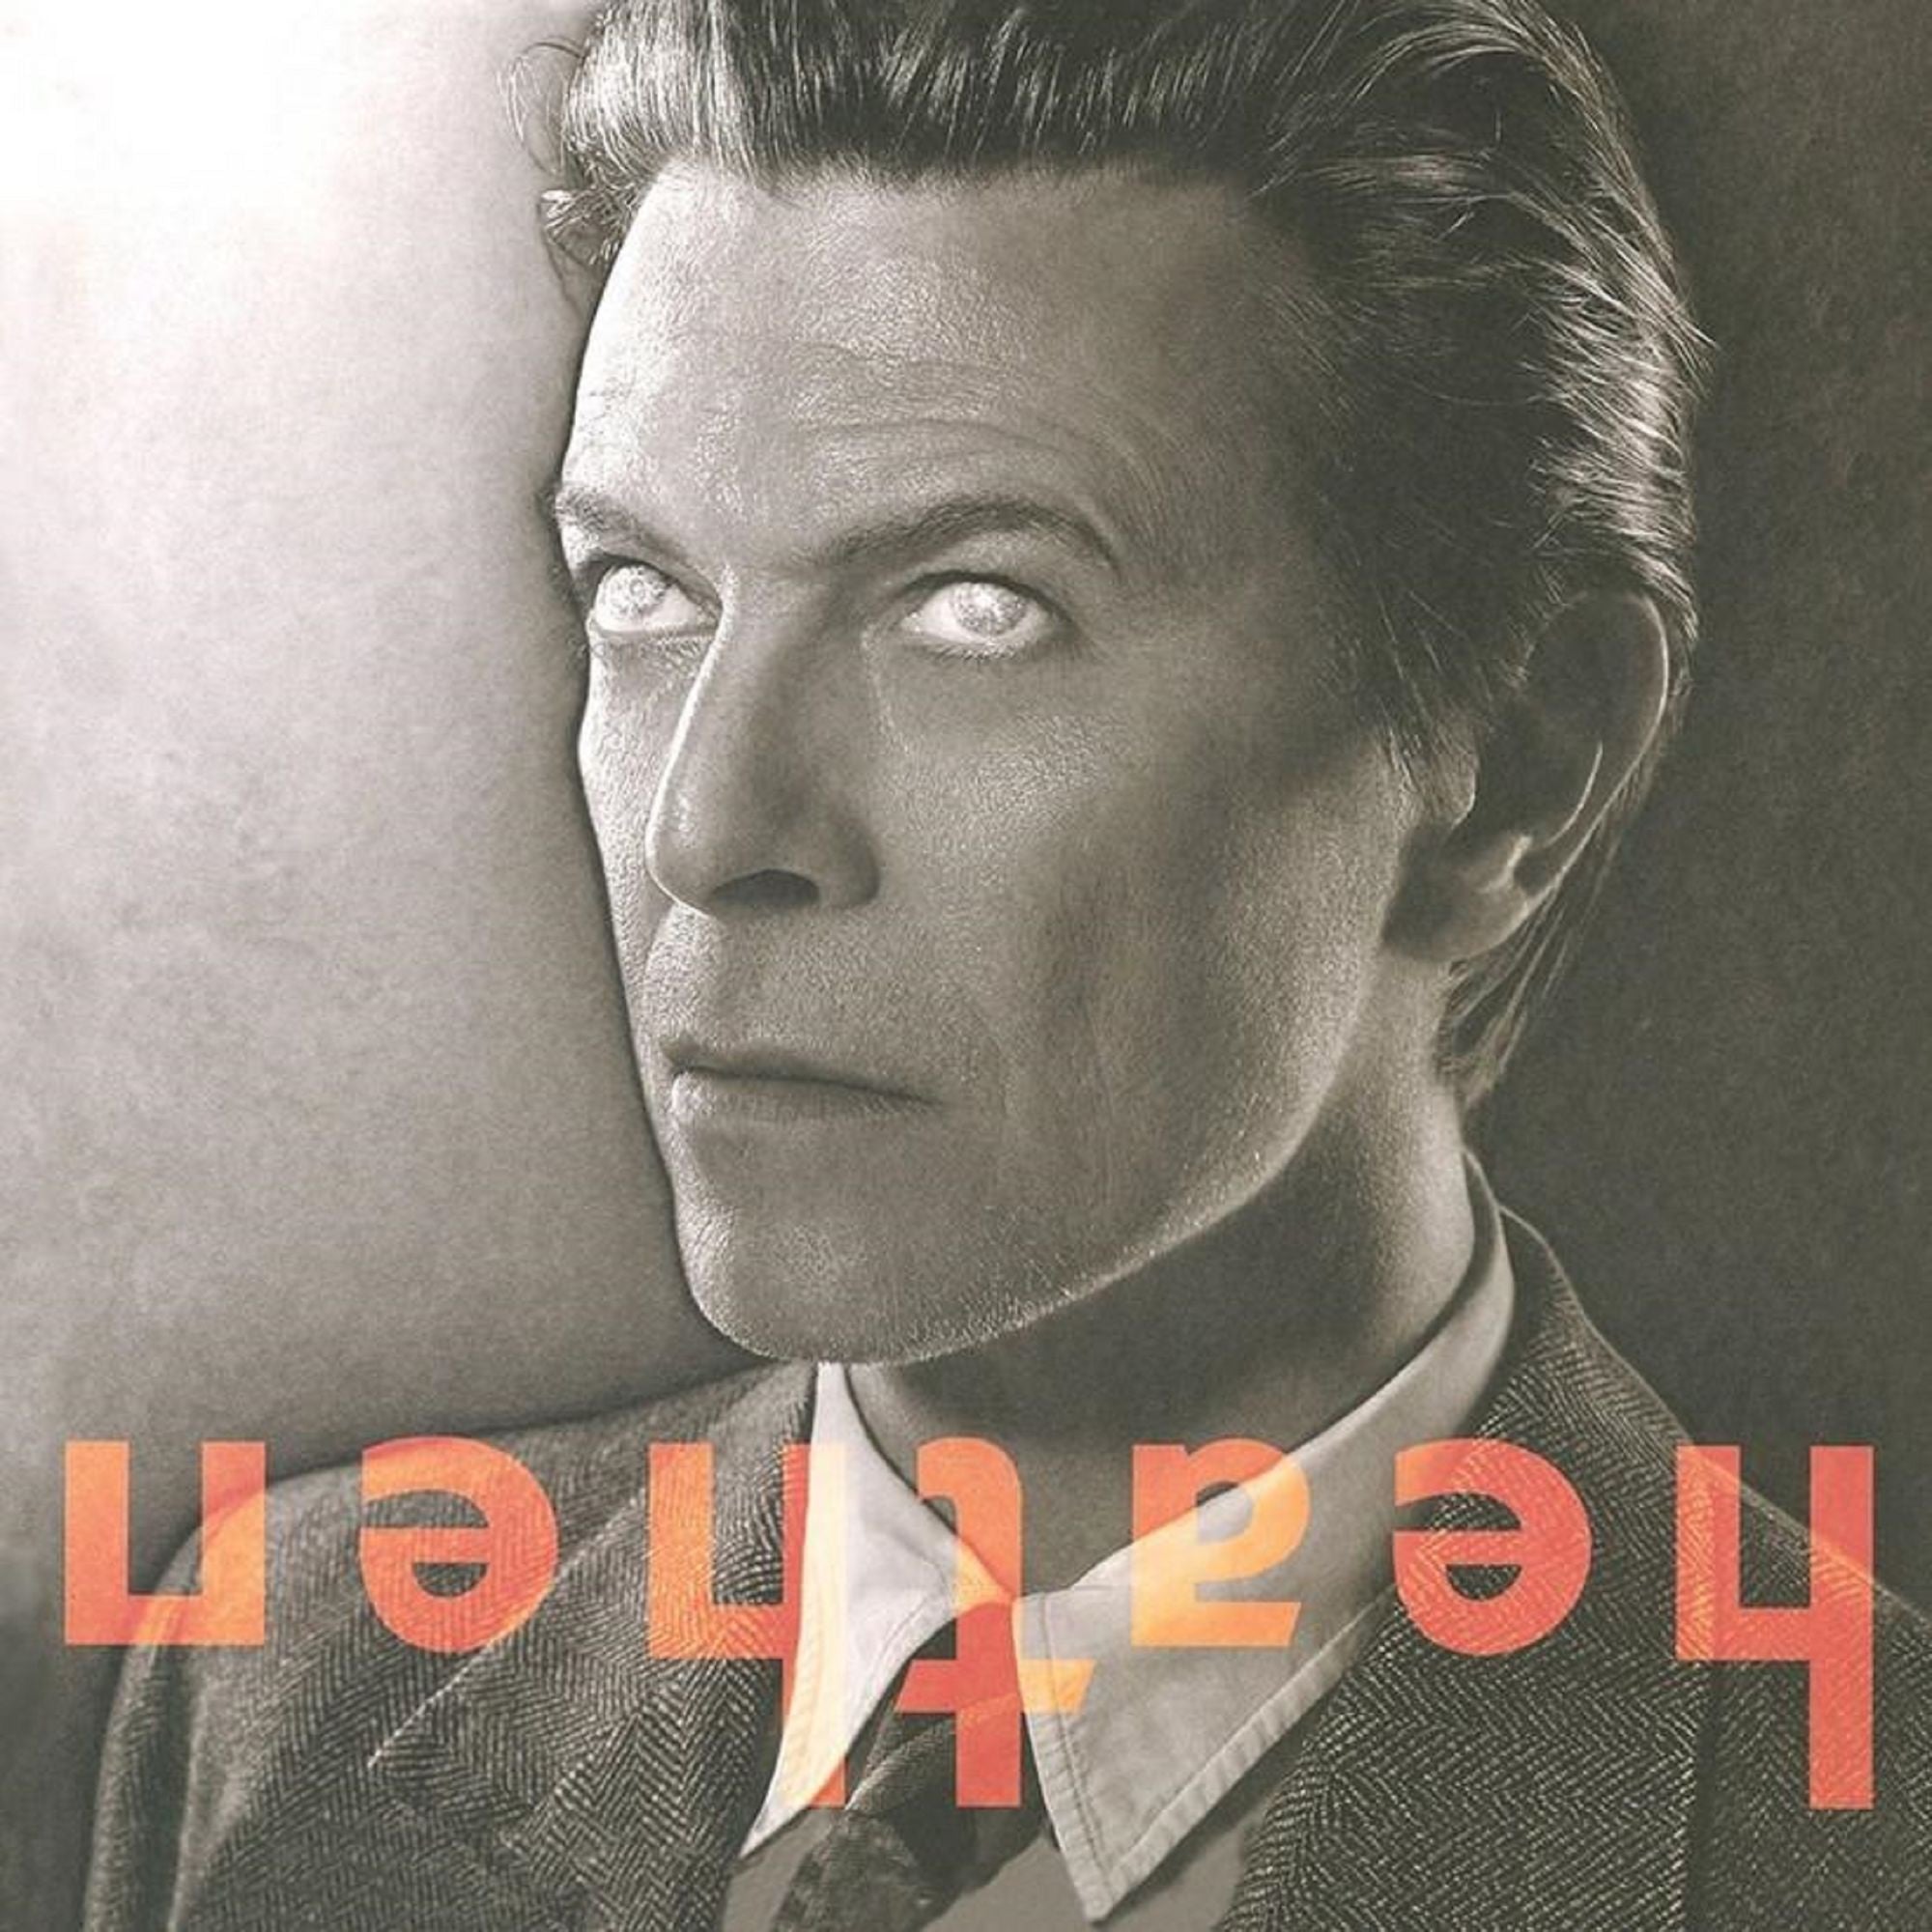 David Bowie - Heathen - New Vinyl Lp 2018 Friday Music Limited Edition 180gram Audiophile Reissue on Red and Orange Vinyl with Tri-Fold Cover - Art Rock